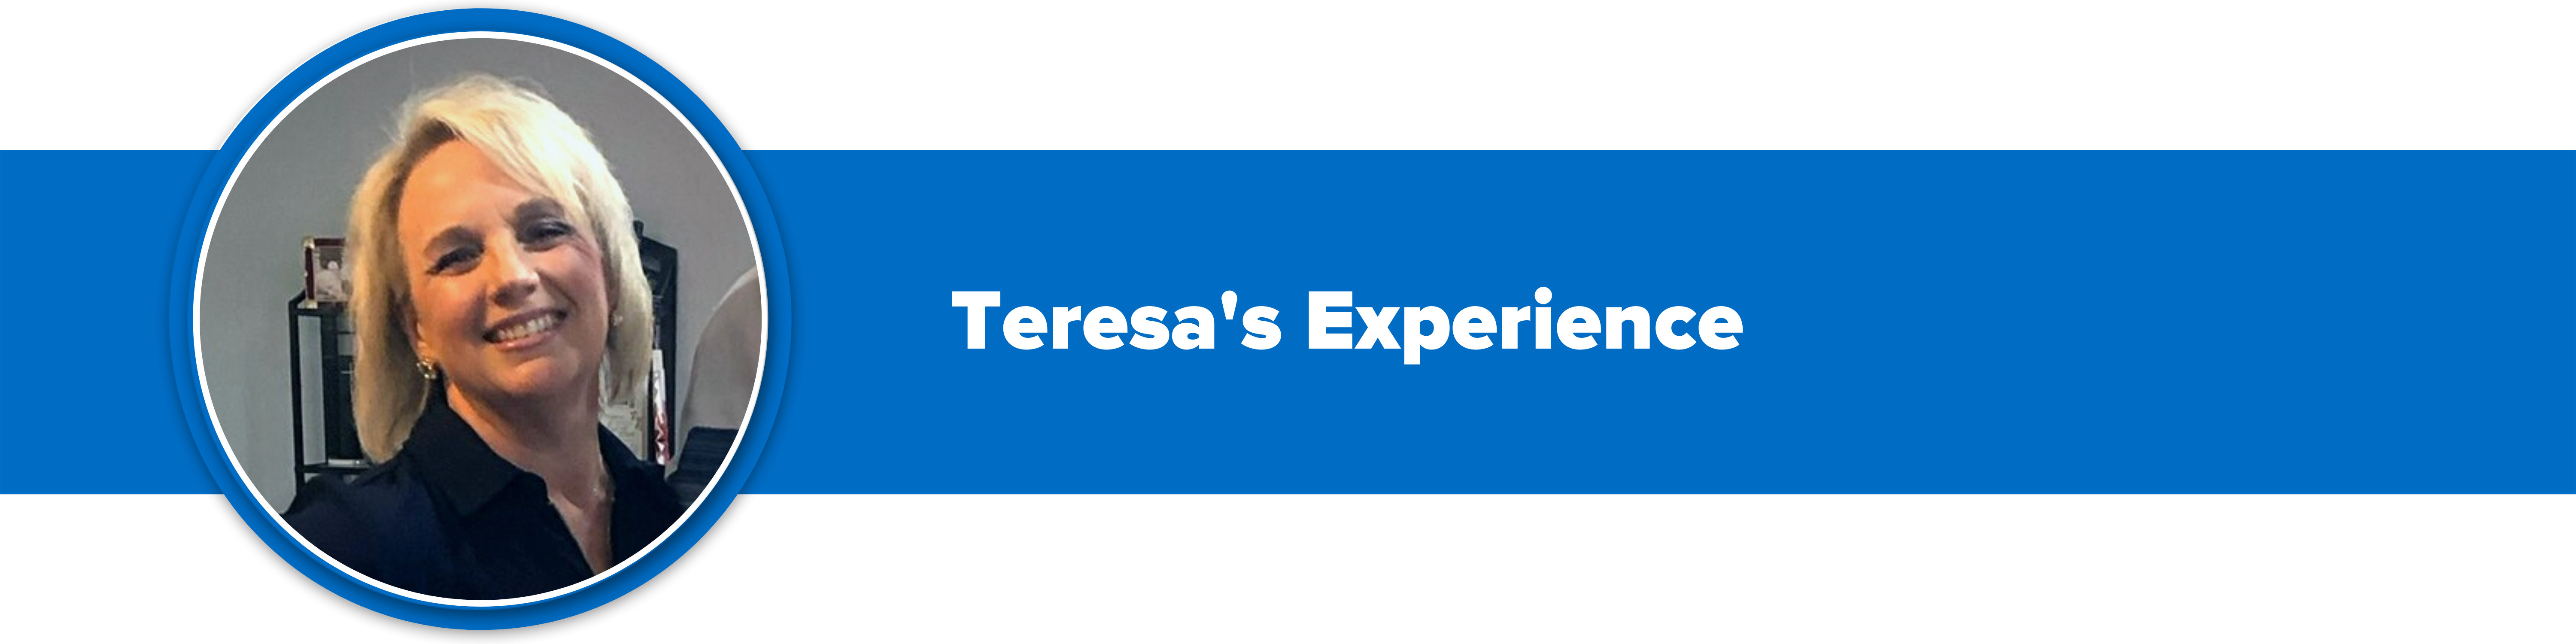 Header image with text "Teresa's Experience" and a headshot of Teresa Sebring, President of the MCAA.